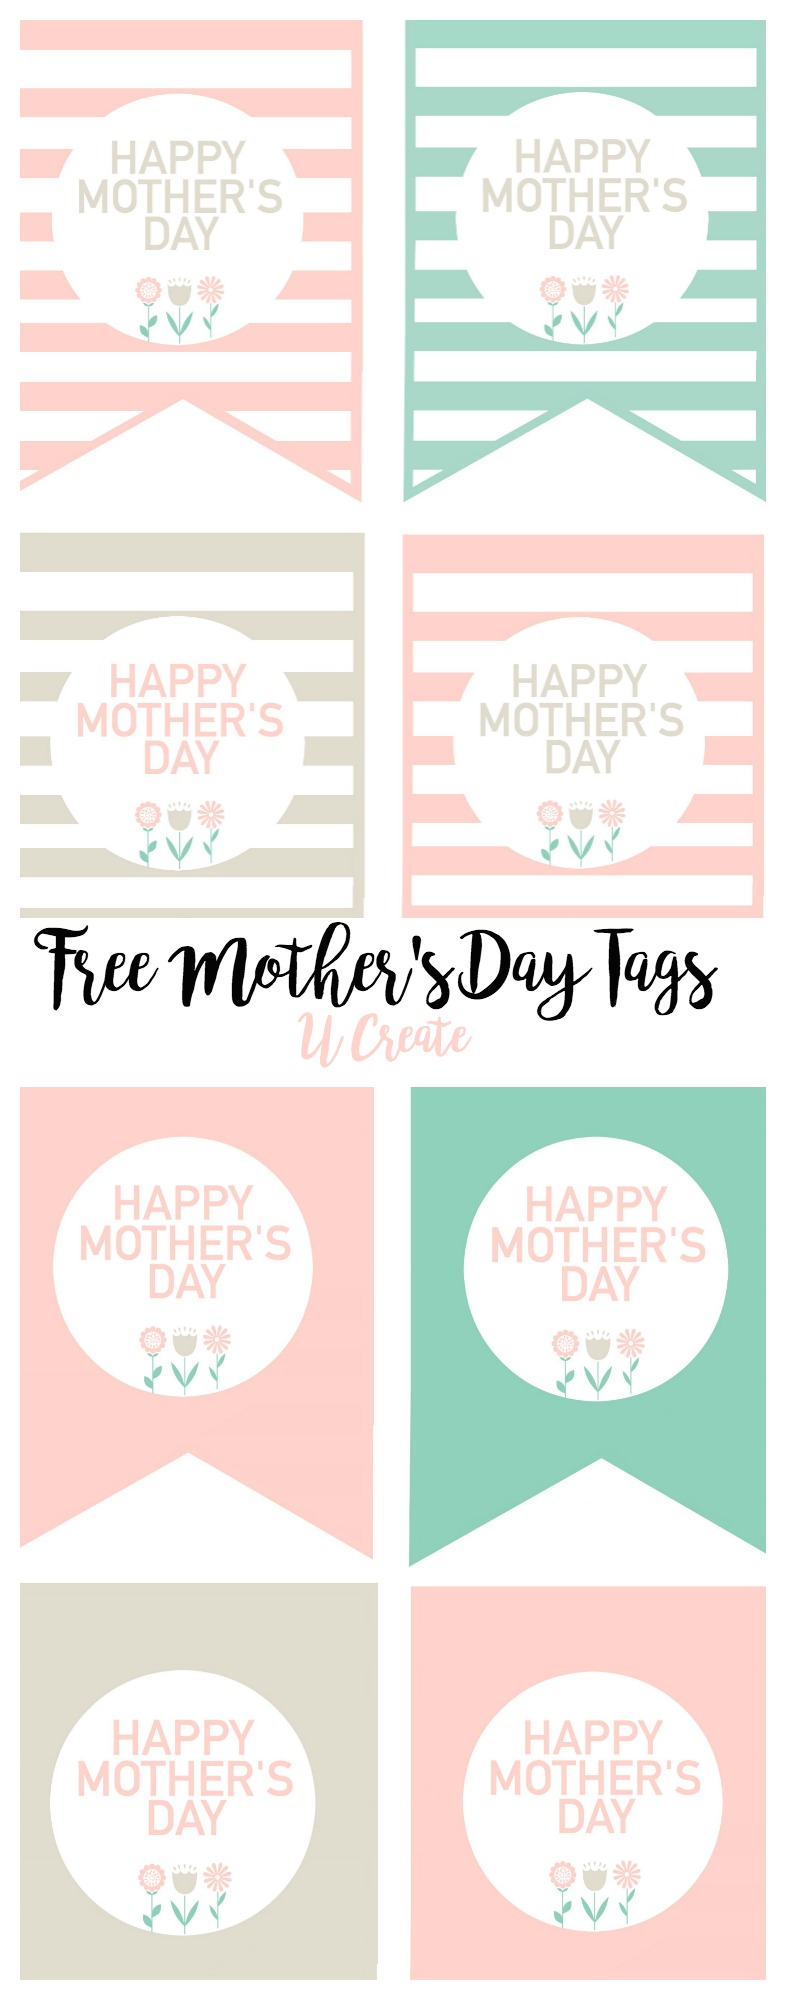 Free Mother's Day Tag Printables - #mothersday #happymothersday